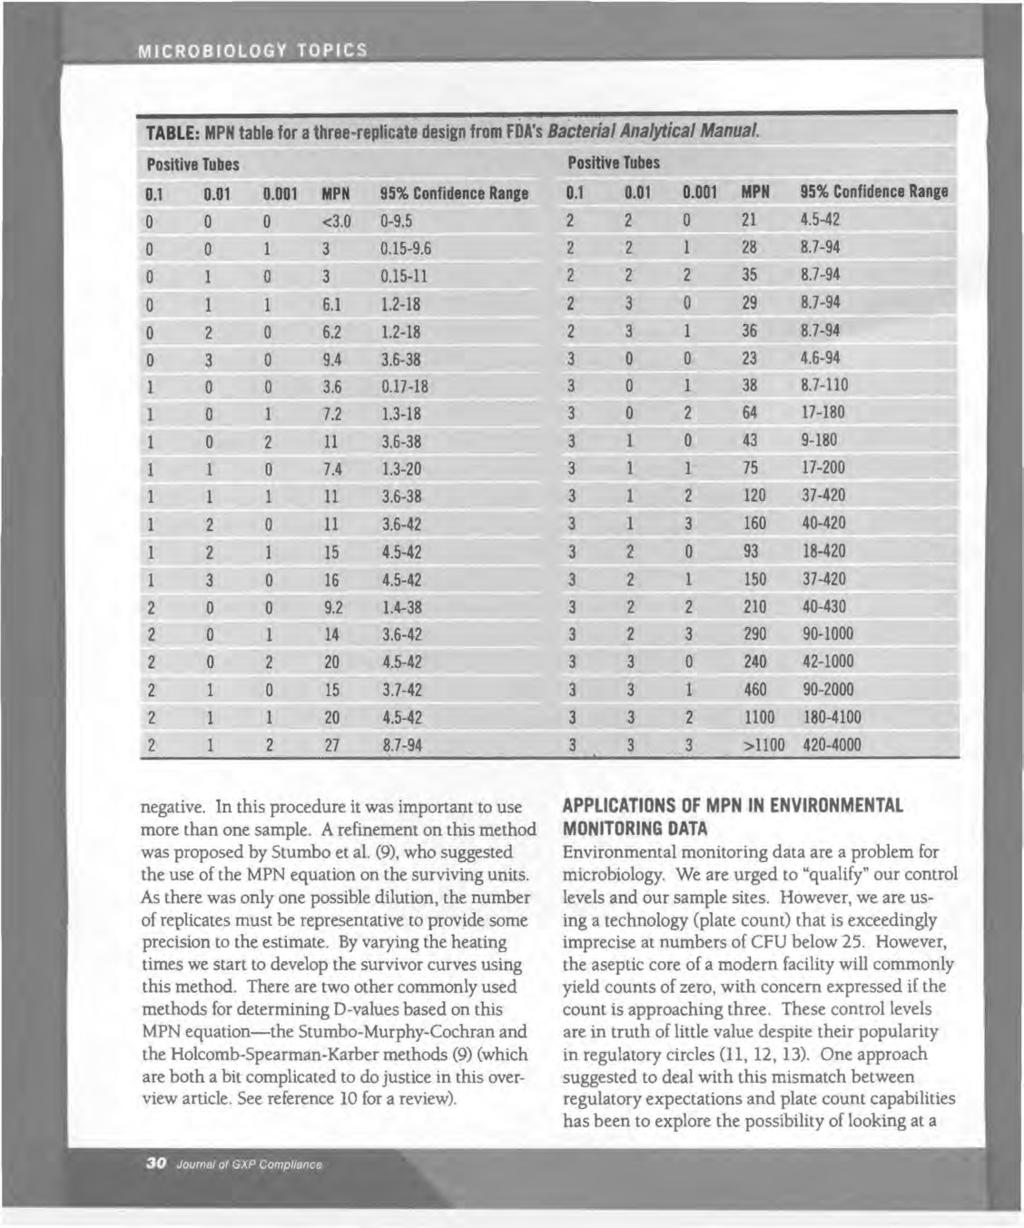 TABLE: MPH table for a three-replicate design from FDA's Bacterial Analytical Manual. Positive Tubes Positive Tubes 0.1 0.01 0.001 MPN 95% Confidence Range 0.1 0.01 0.001 MPN 95% Confidence Range 0 0 0 <3.